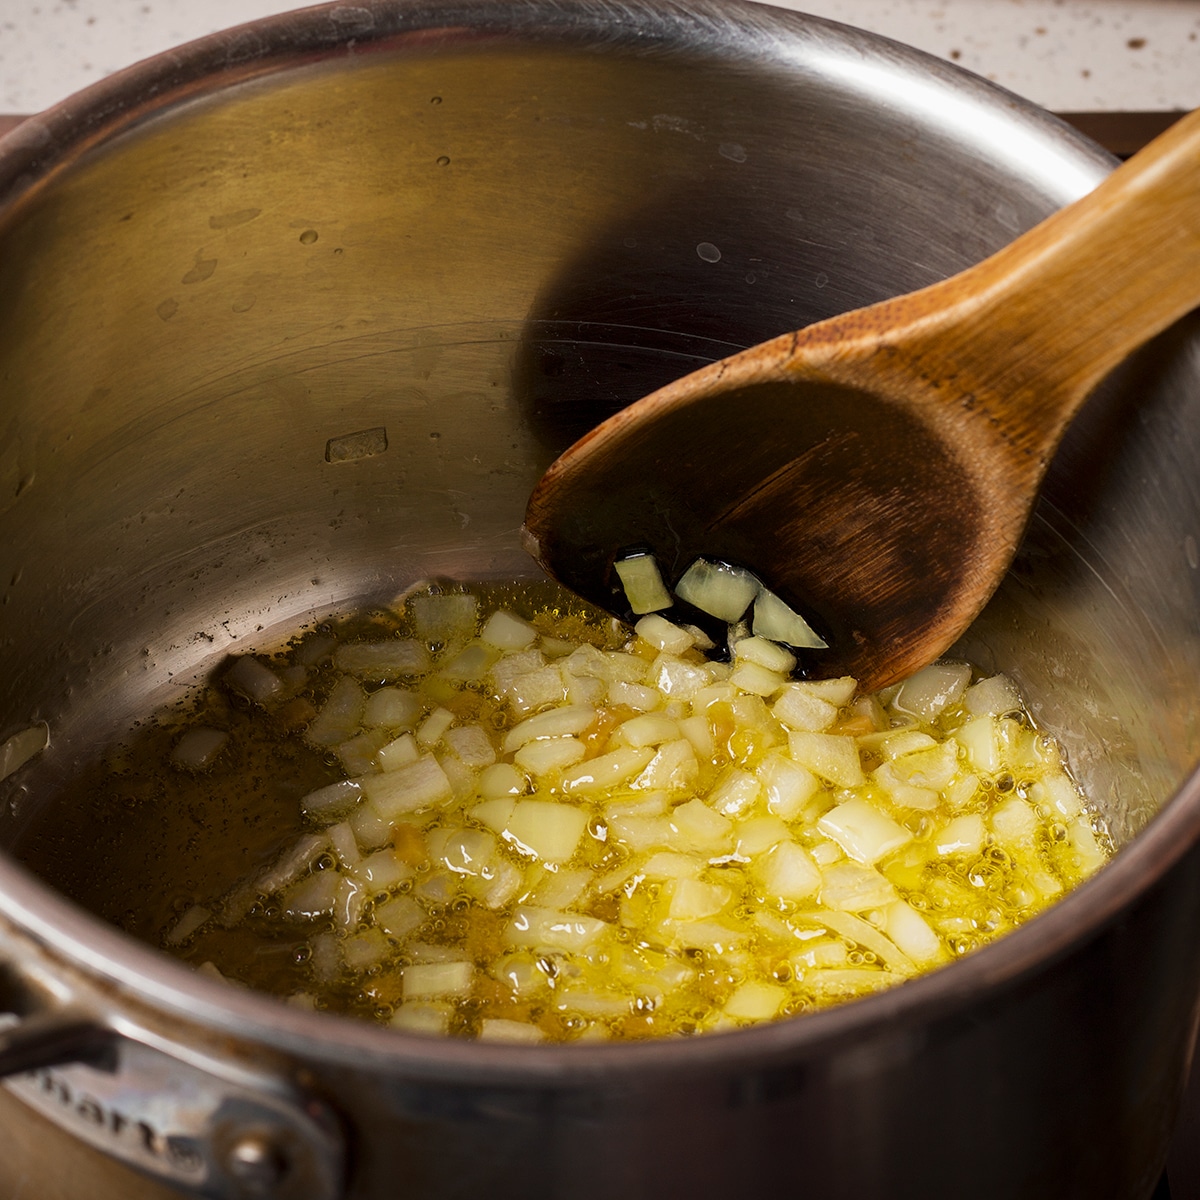 Using a wooden spoon to stir chopped onions and shallots in a saucepan.